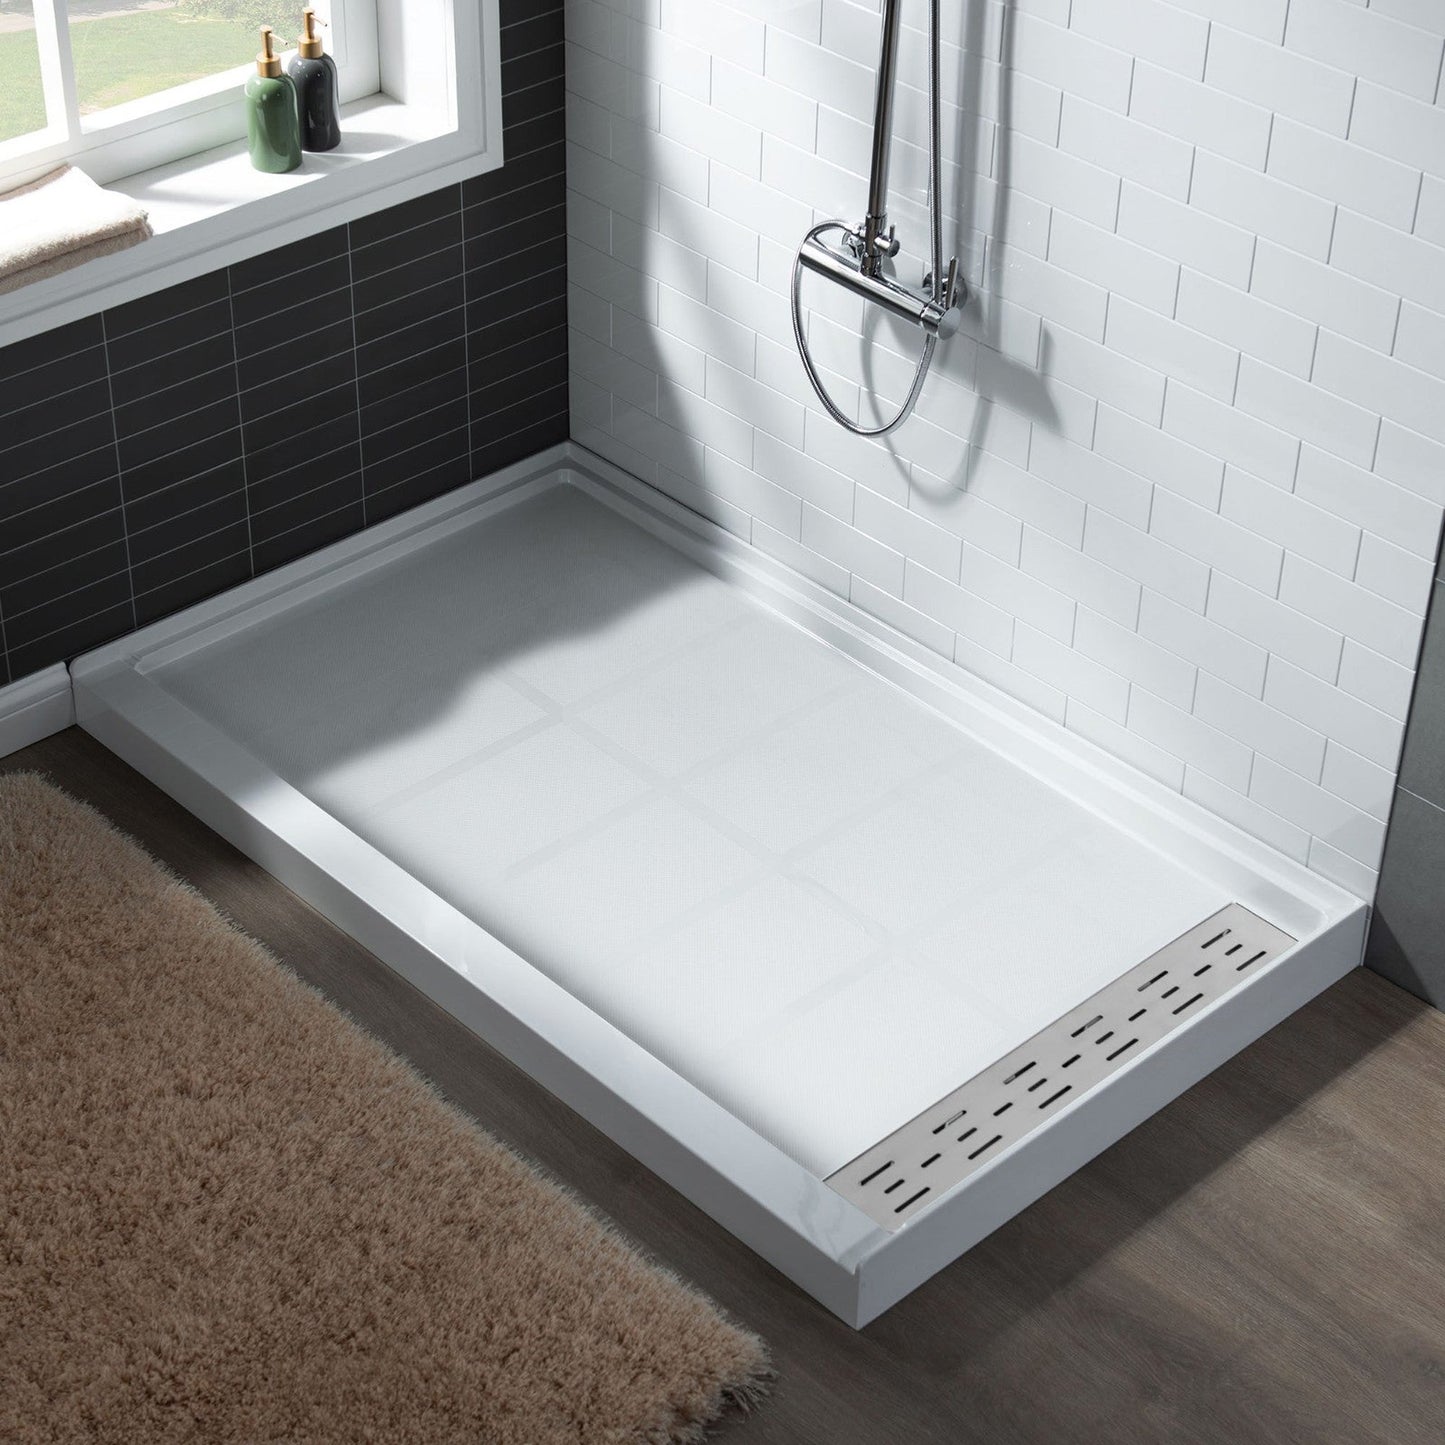 WoodBridge 60" x 30" White Solid Surface Shower Base Right Drain Location With Brushed Nickel Trench Drain Cover